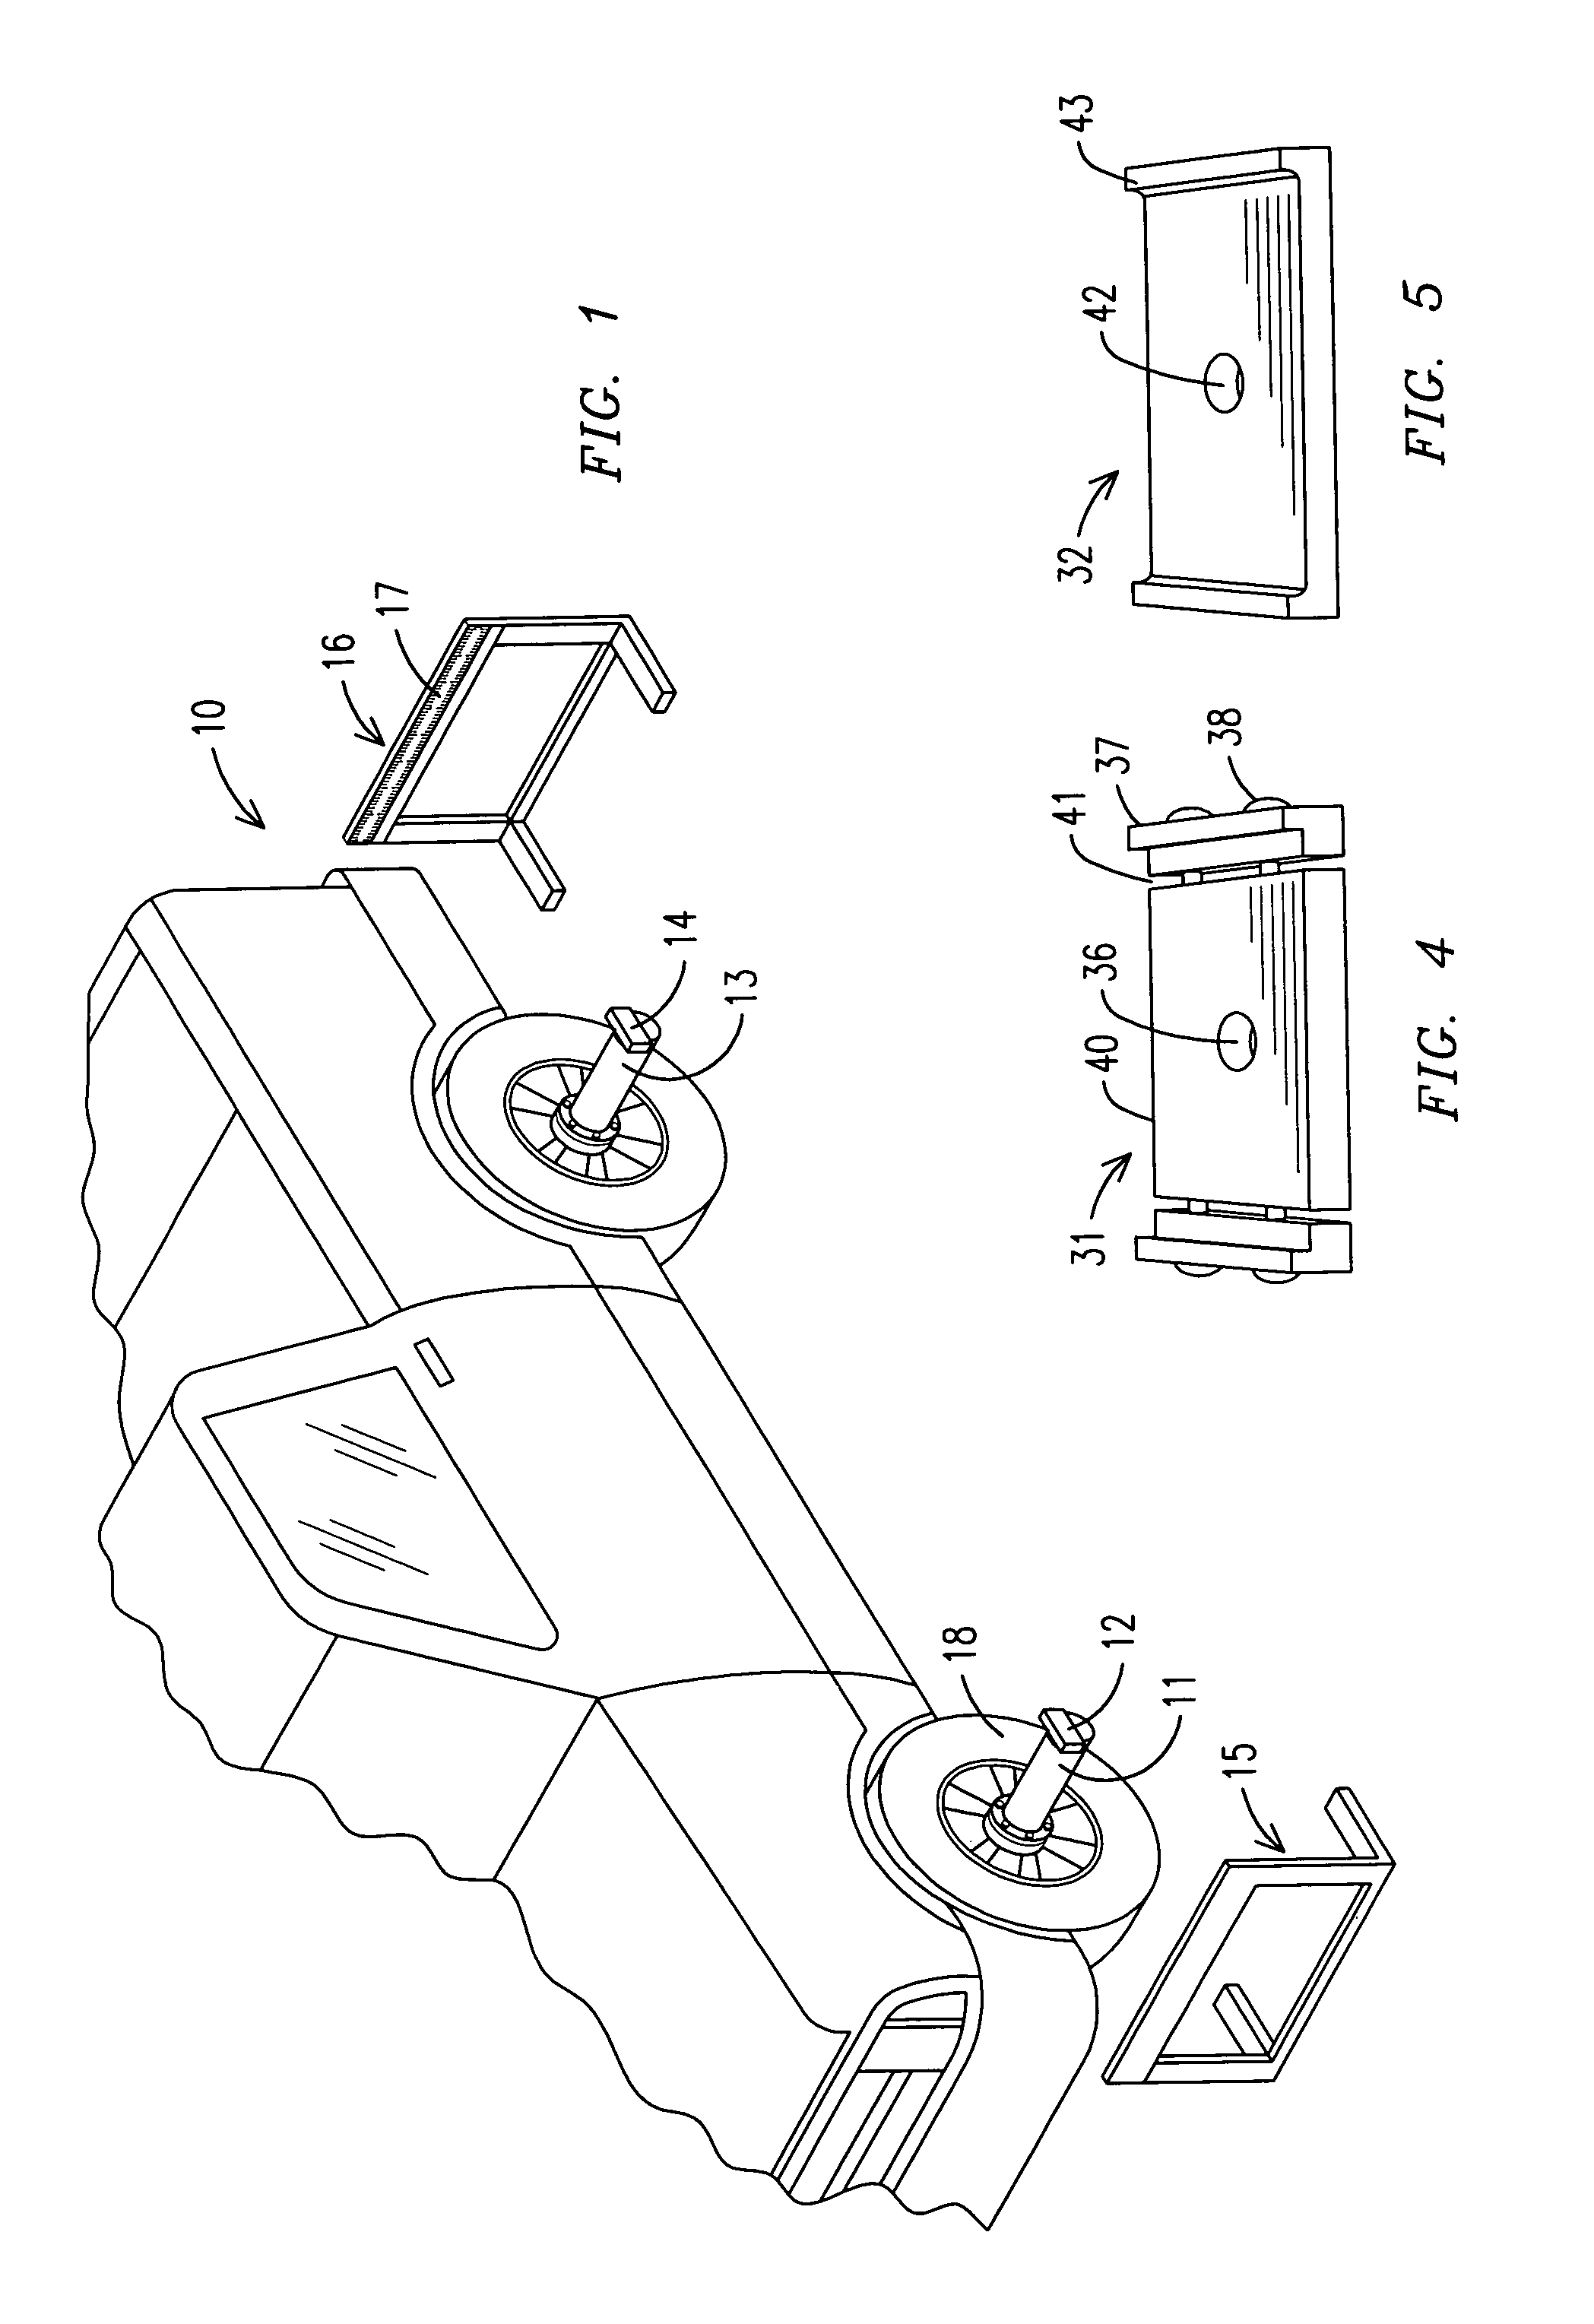 Method and apparatus for aligning the axle of a vehicle